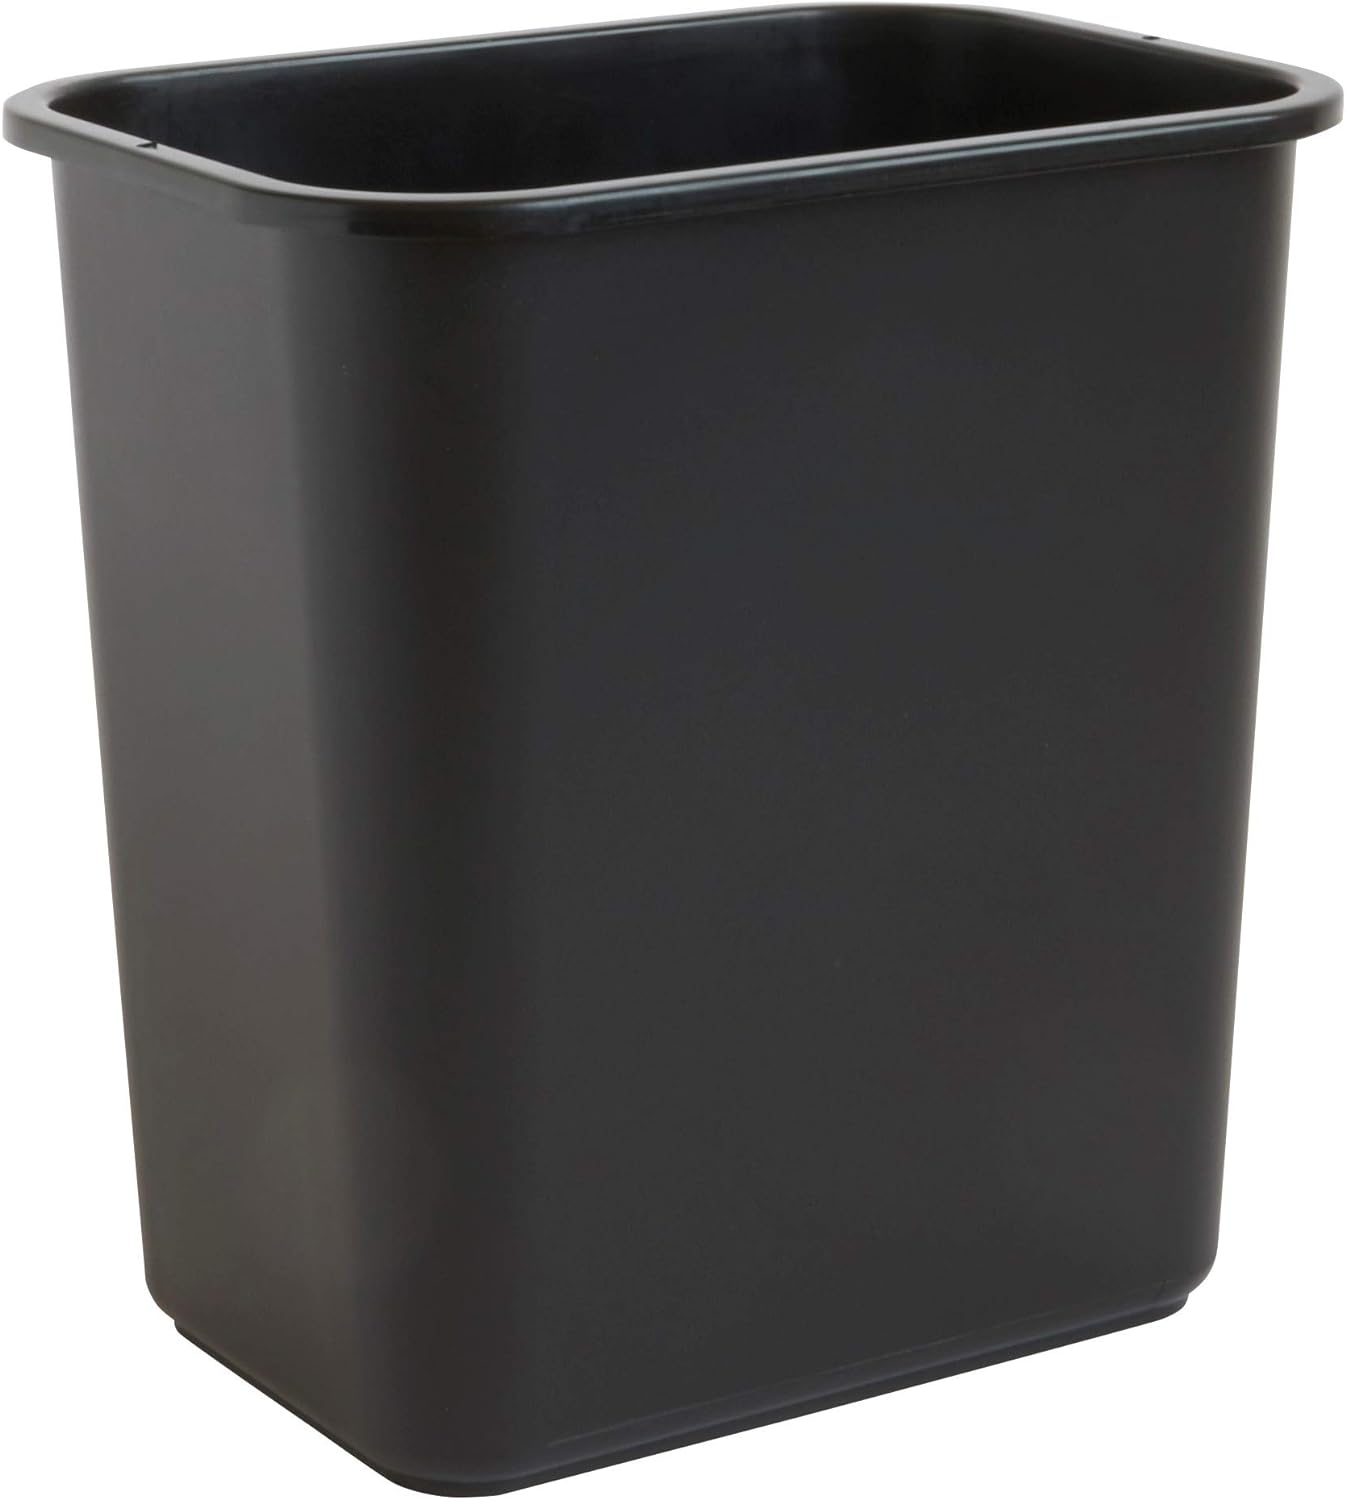 United Solutions Recycling Bin Review